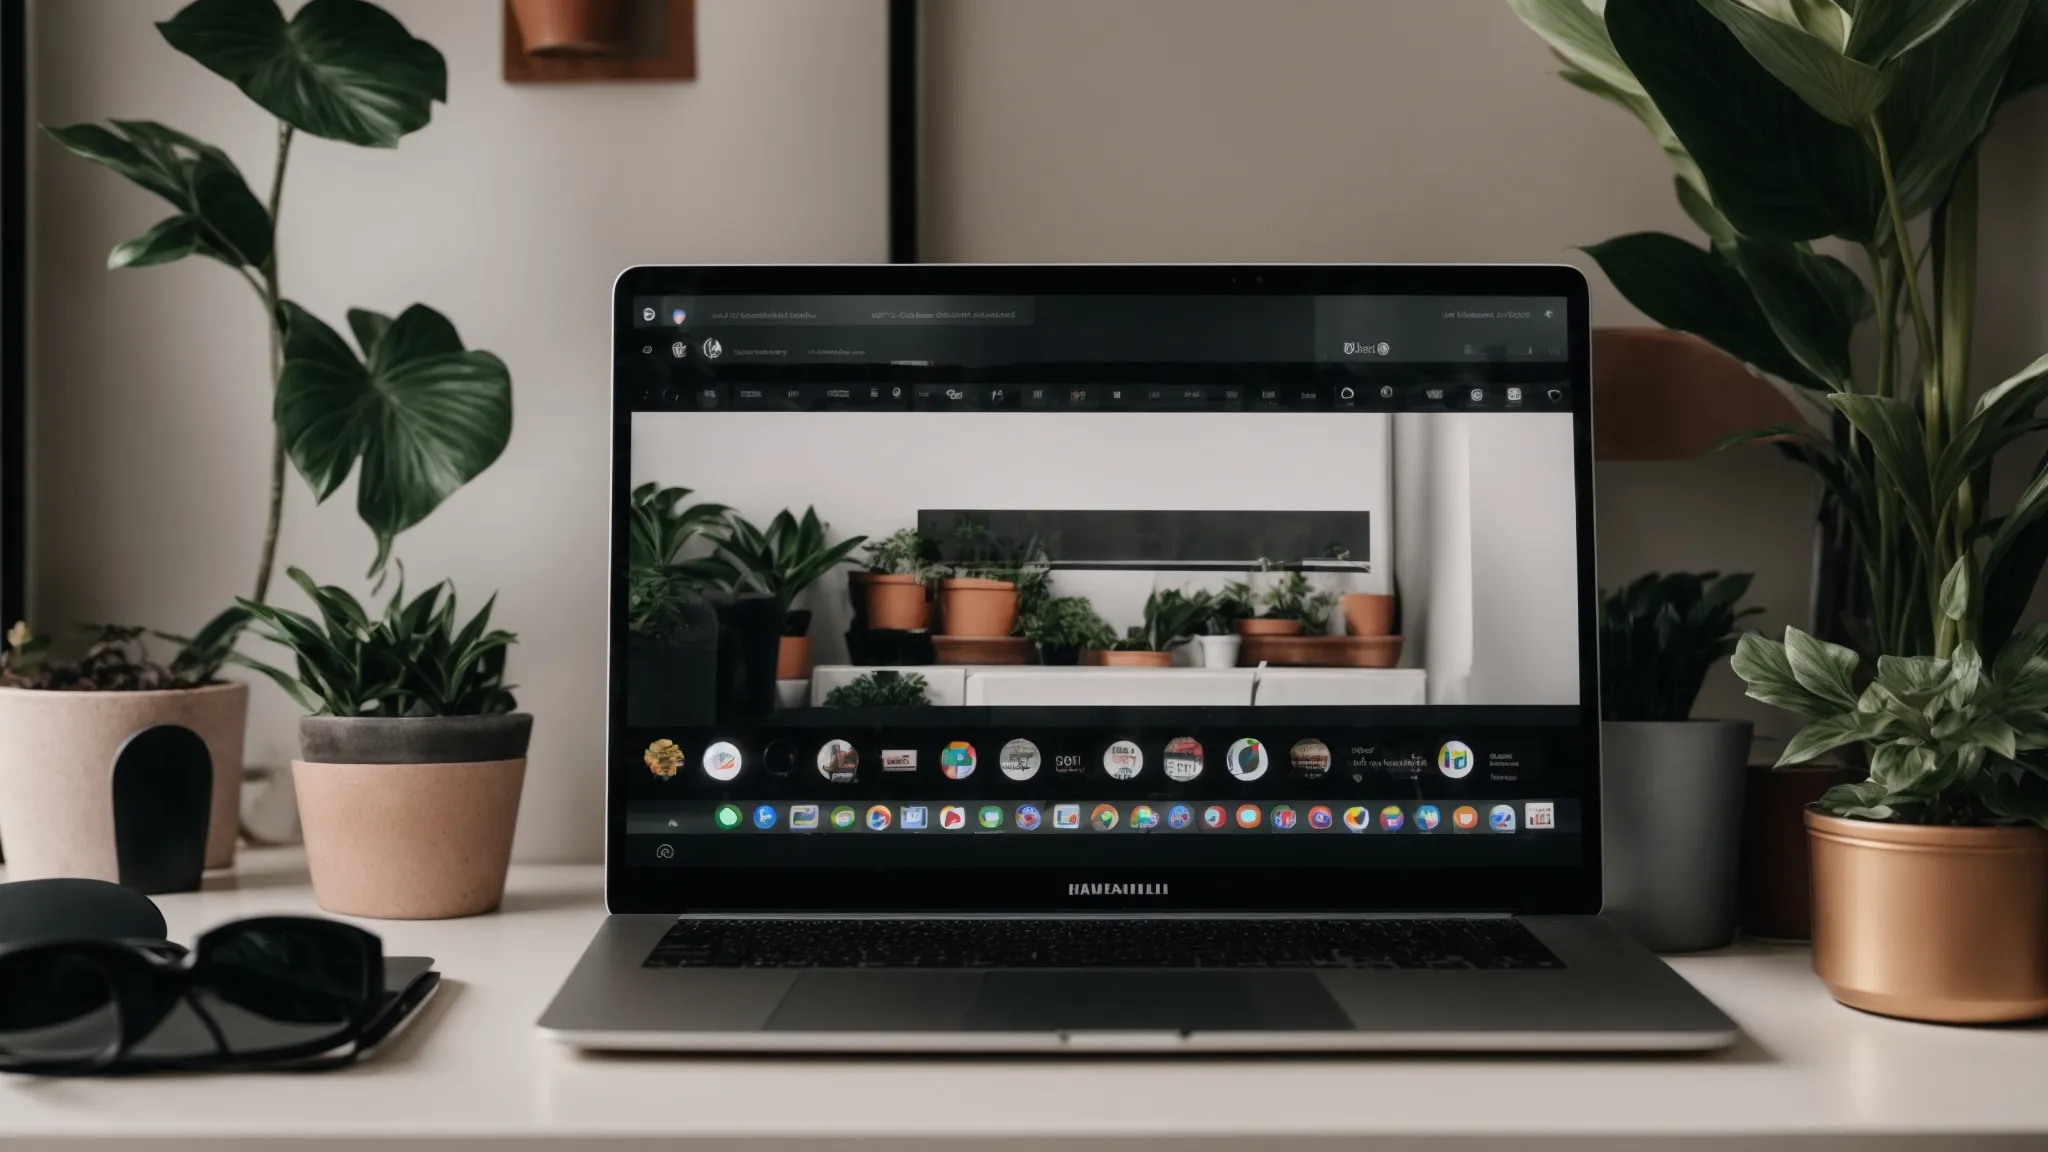 a laptop with blank stickers over its webcam and branding sits on a minimalist desk next to a potted plant, symbolizing privacy and digital security.